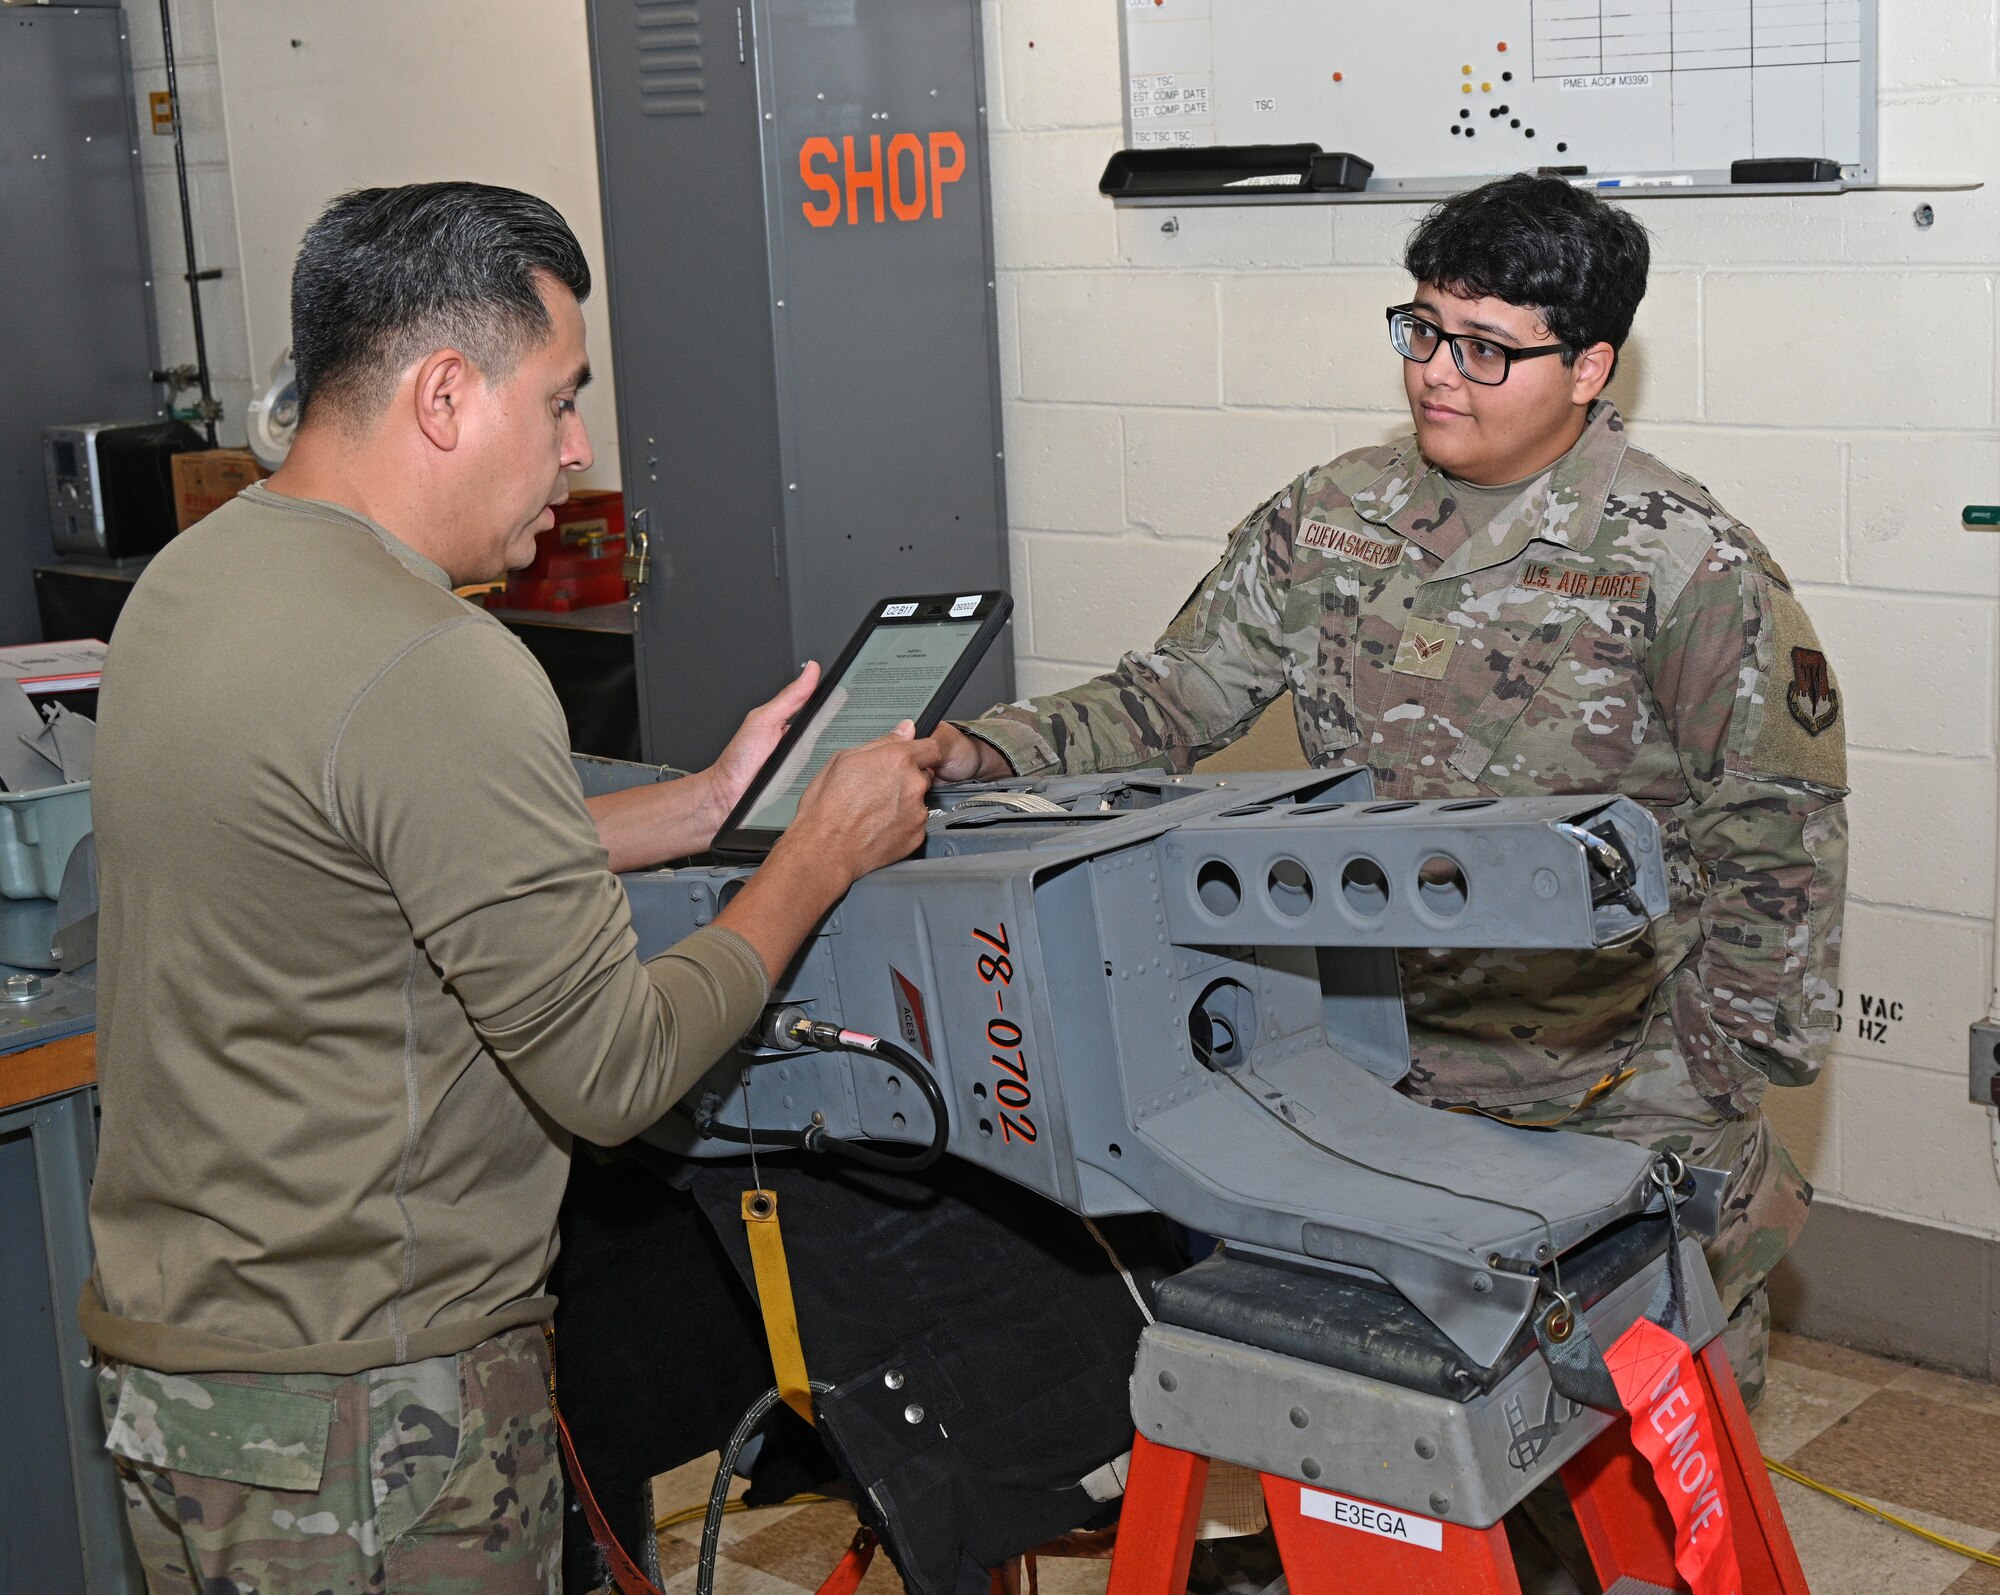 U.S. Air Force Staff Sgt. Alfredo Lepe (left), a 7-level egress systems technician assigned to the 175th Maintenance Squadron, reads over a technical order while training U.S. Air Force Senior Airman Natalia Cuevas Mercado, an egress systems technician with the 175th Maintenance Squadron, at Warfield Air National Guard Base at Martin State Airport in Middle River, Maryland, October 6, 2022.